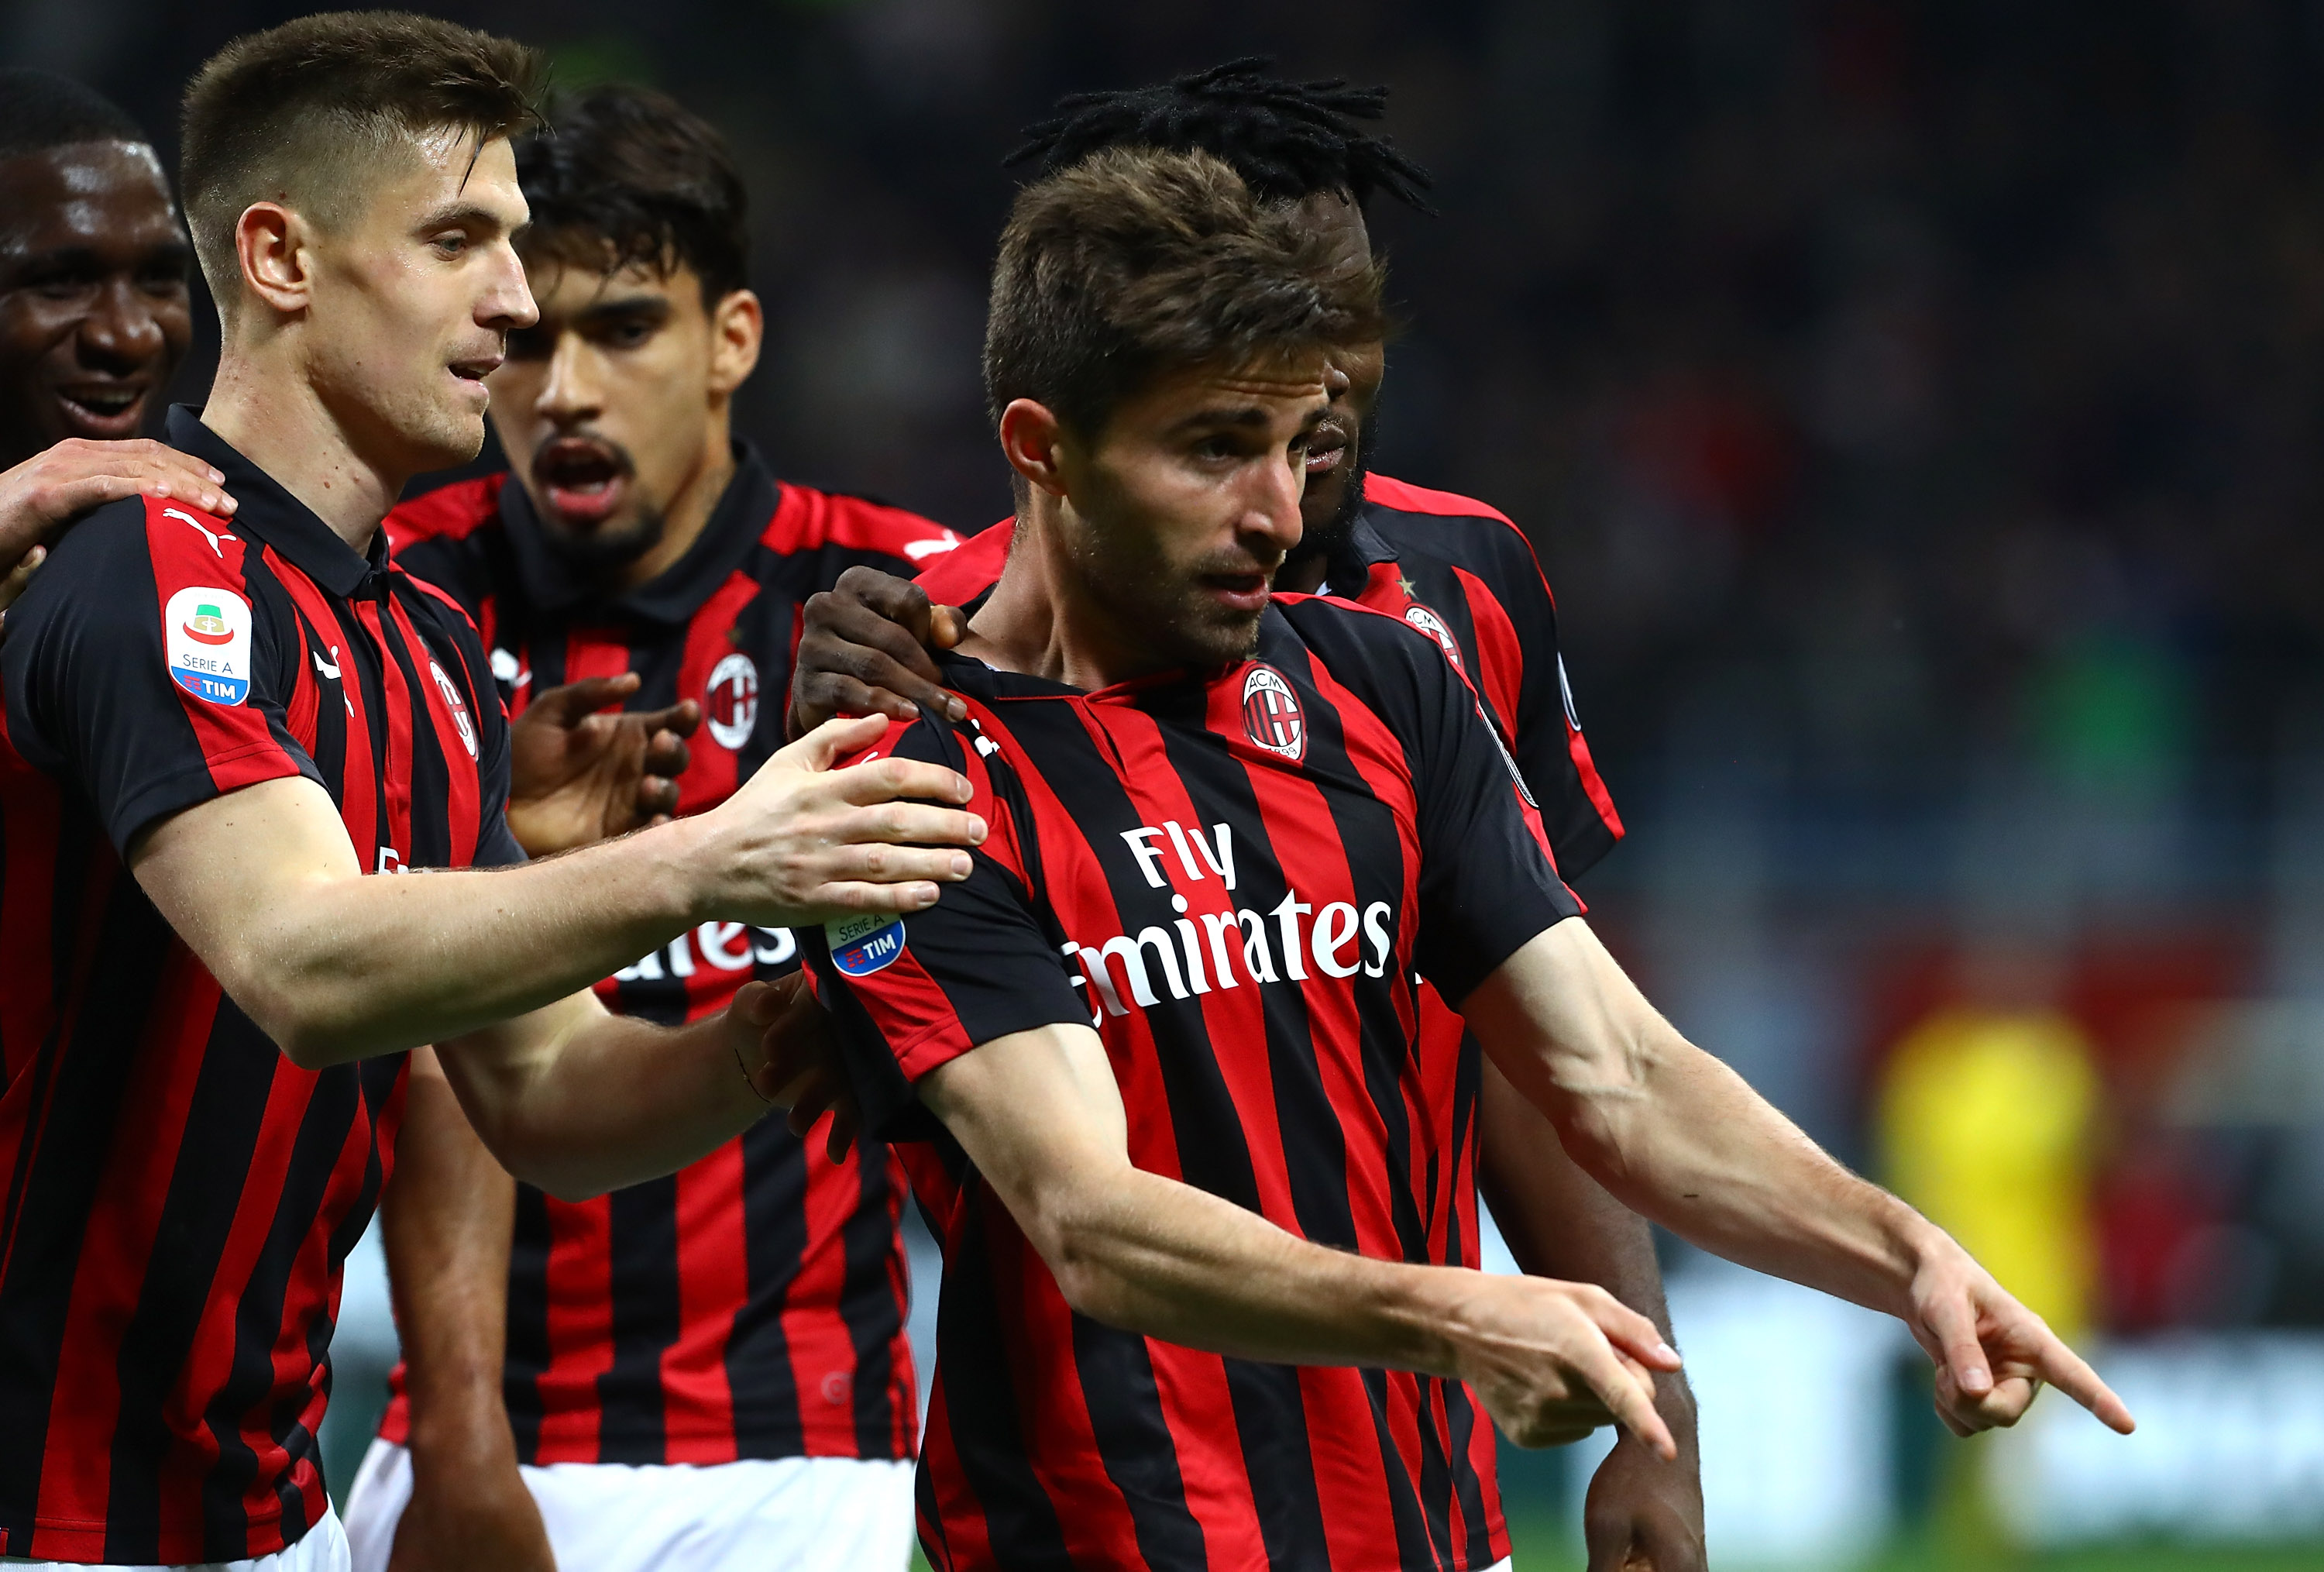 MILAN, ITALY - MAY 06:  Fabio Borini (R) of AC Milan celebrates his goal with his team-mates during the Serie A match between AC Milan and Bologna FC at Stadio Giuseppe Meazza on May 6, 2019 in Milan, Italy.  (Photo by Marco Luzzani/Getty Images)